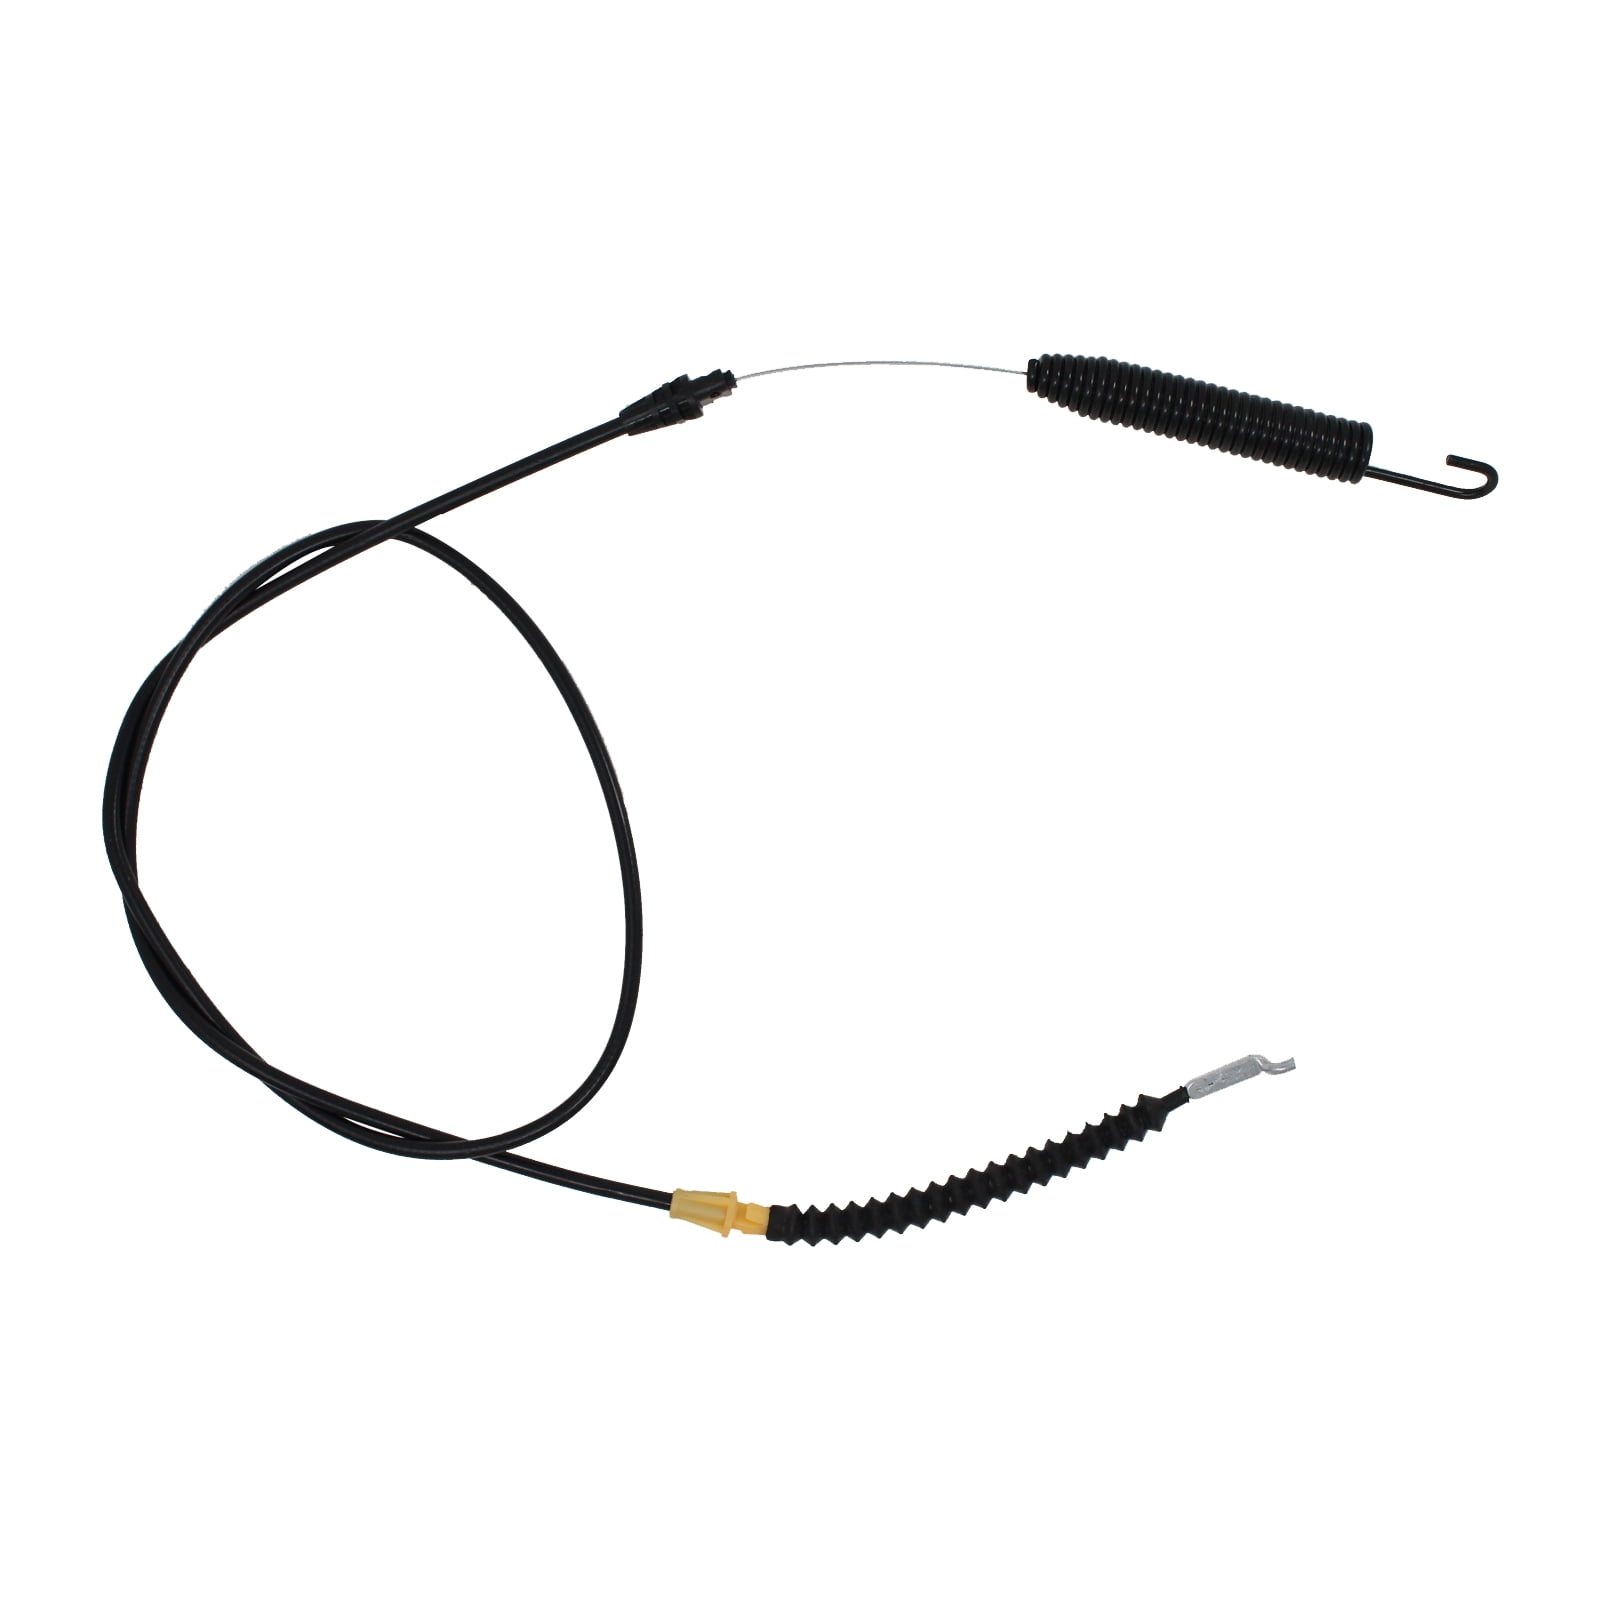 Replacement Deck Engagement Cable fits Cub Cadet 946-04618 A B C 